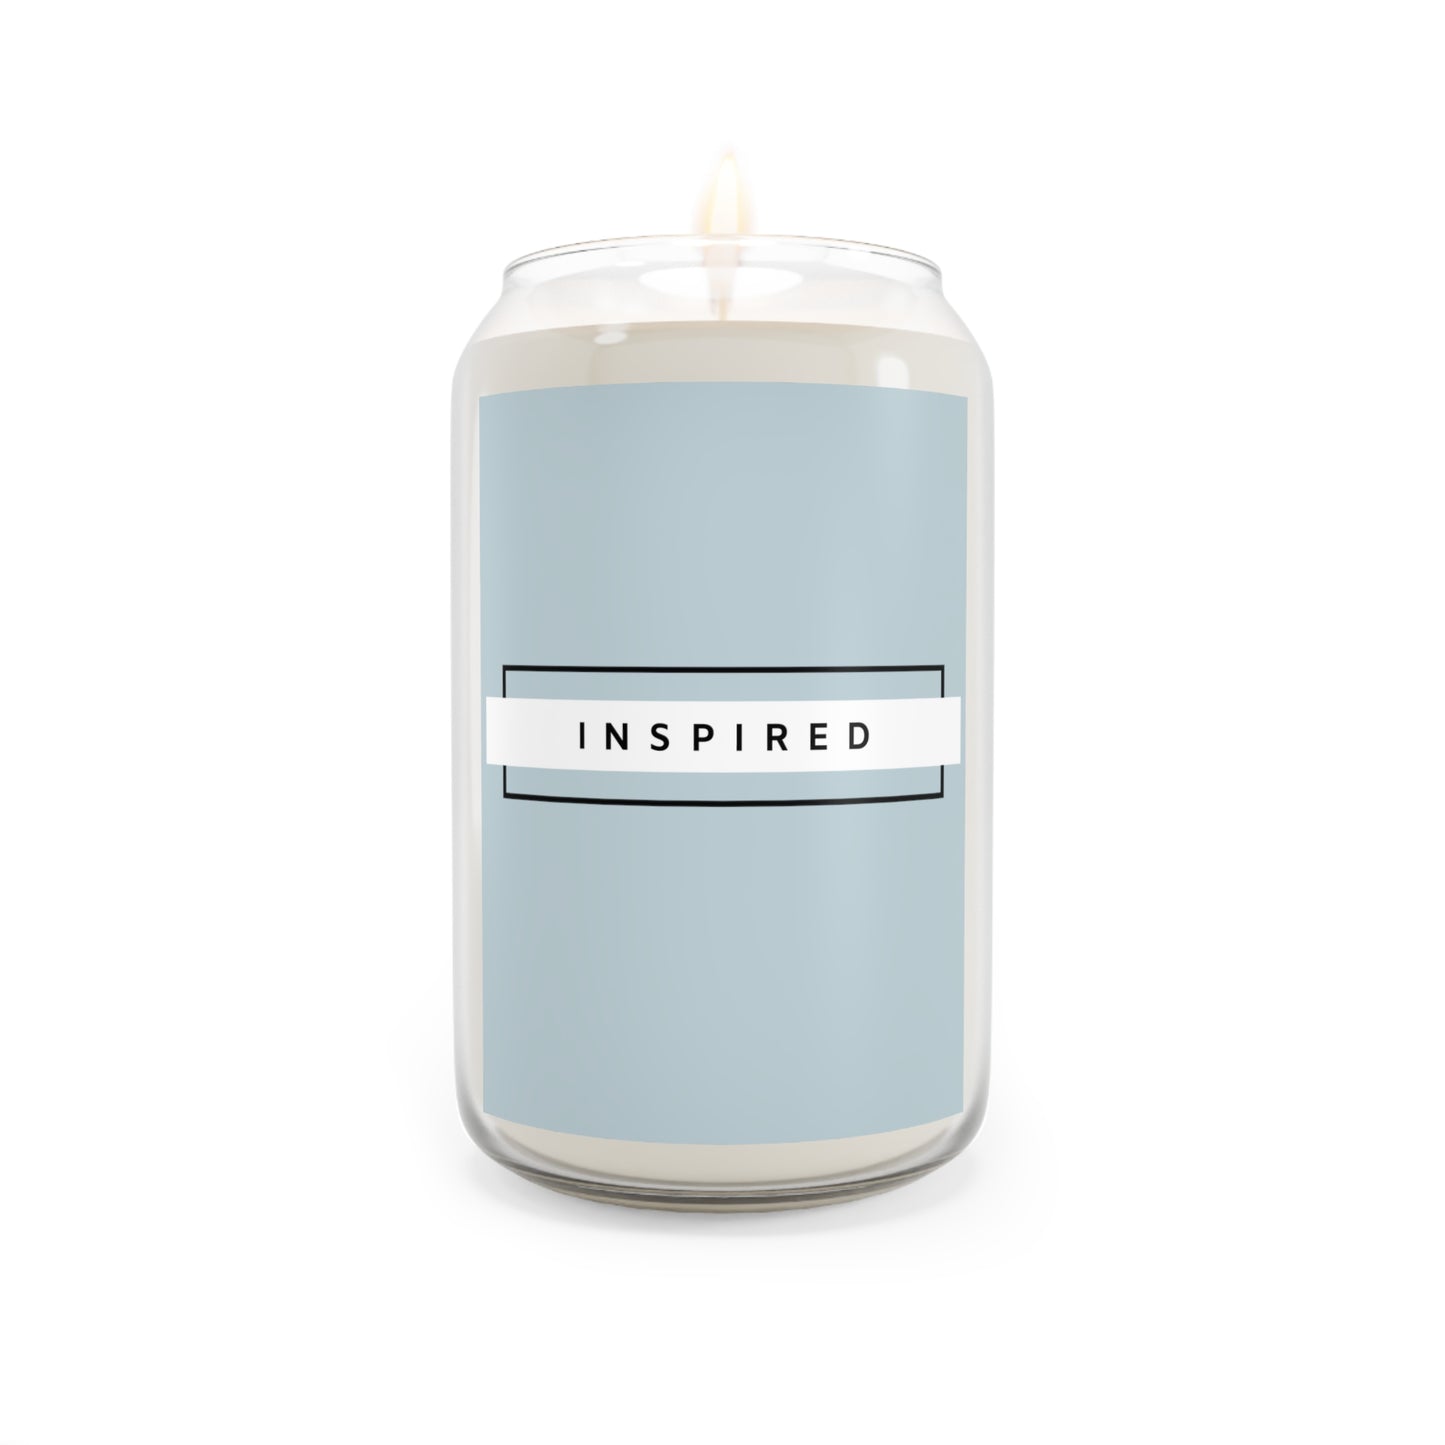 INSPIRED Lb Big Scented Candle, 13.75oz